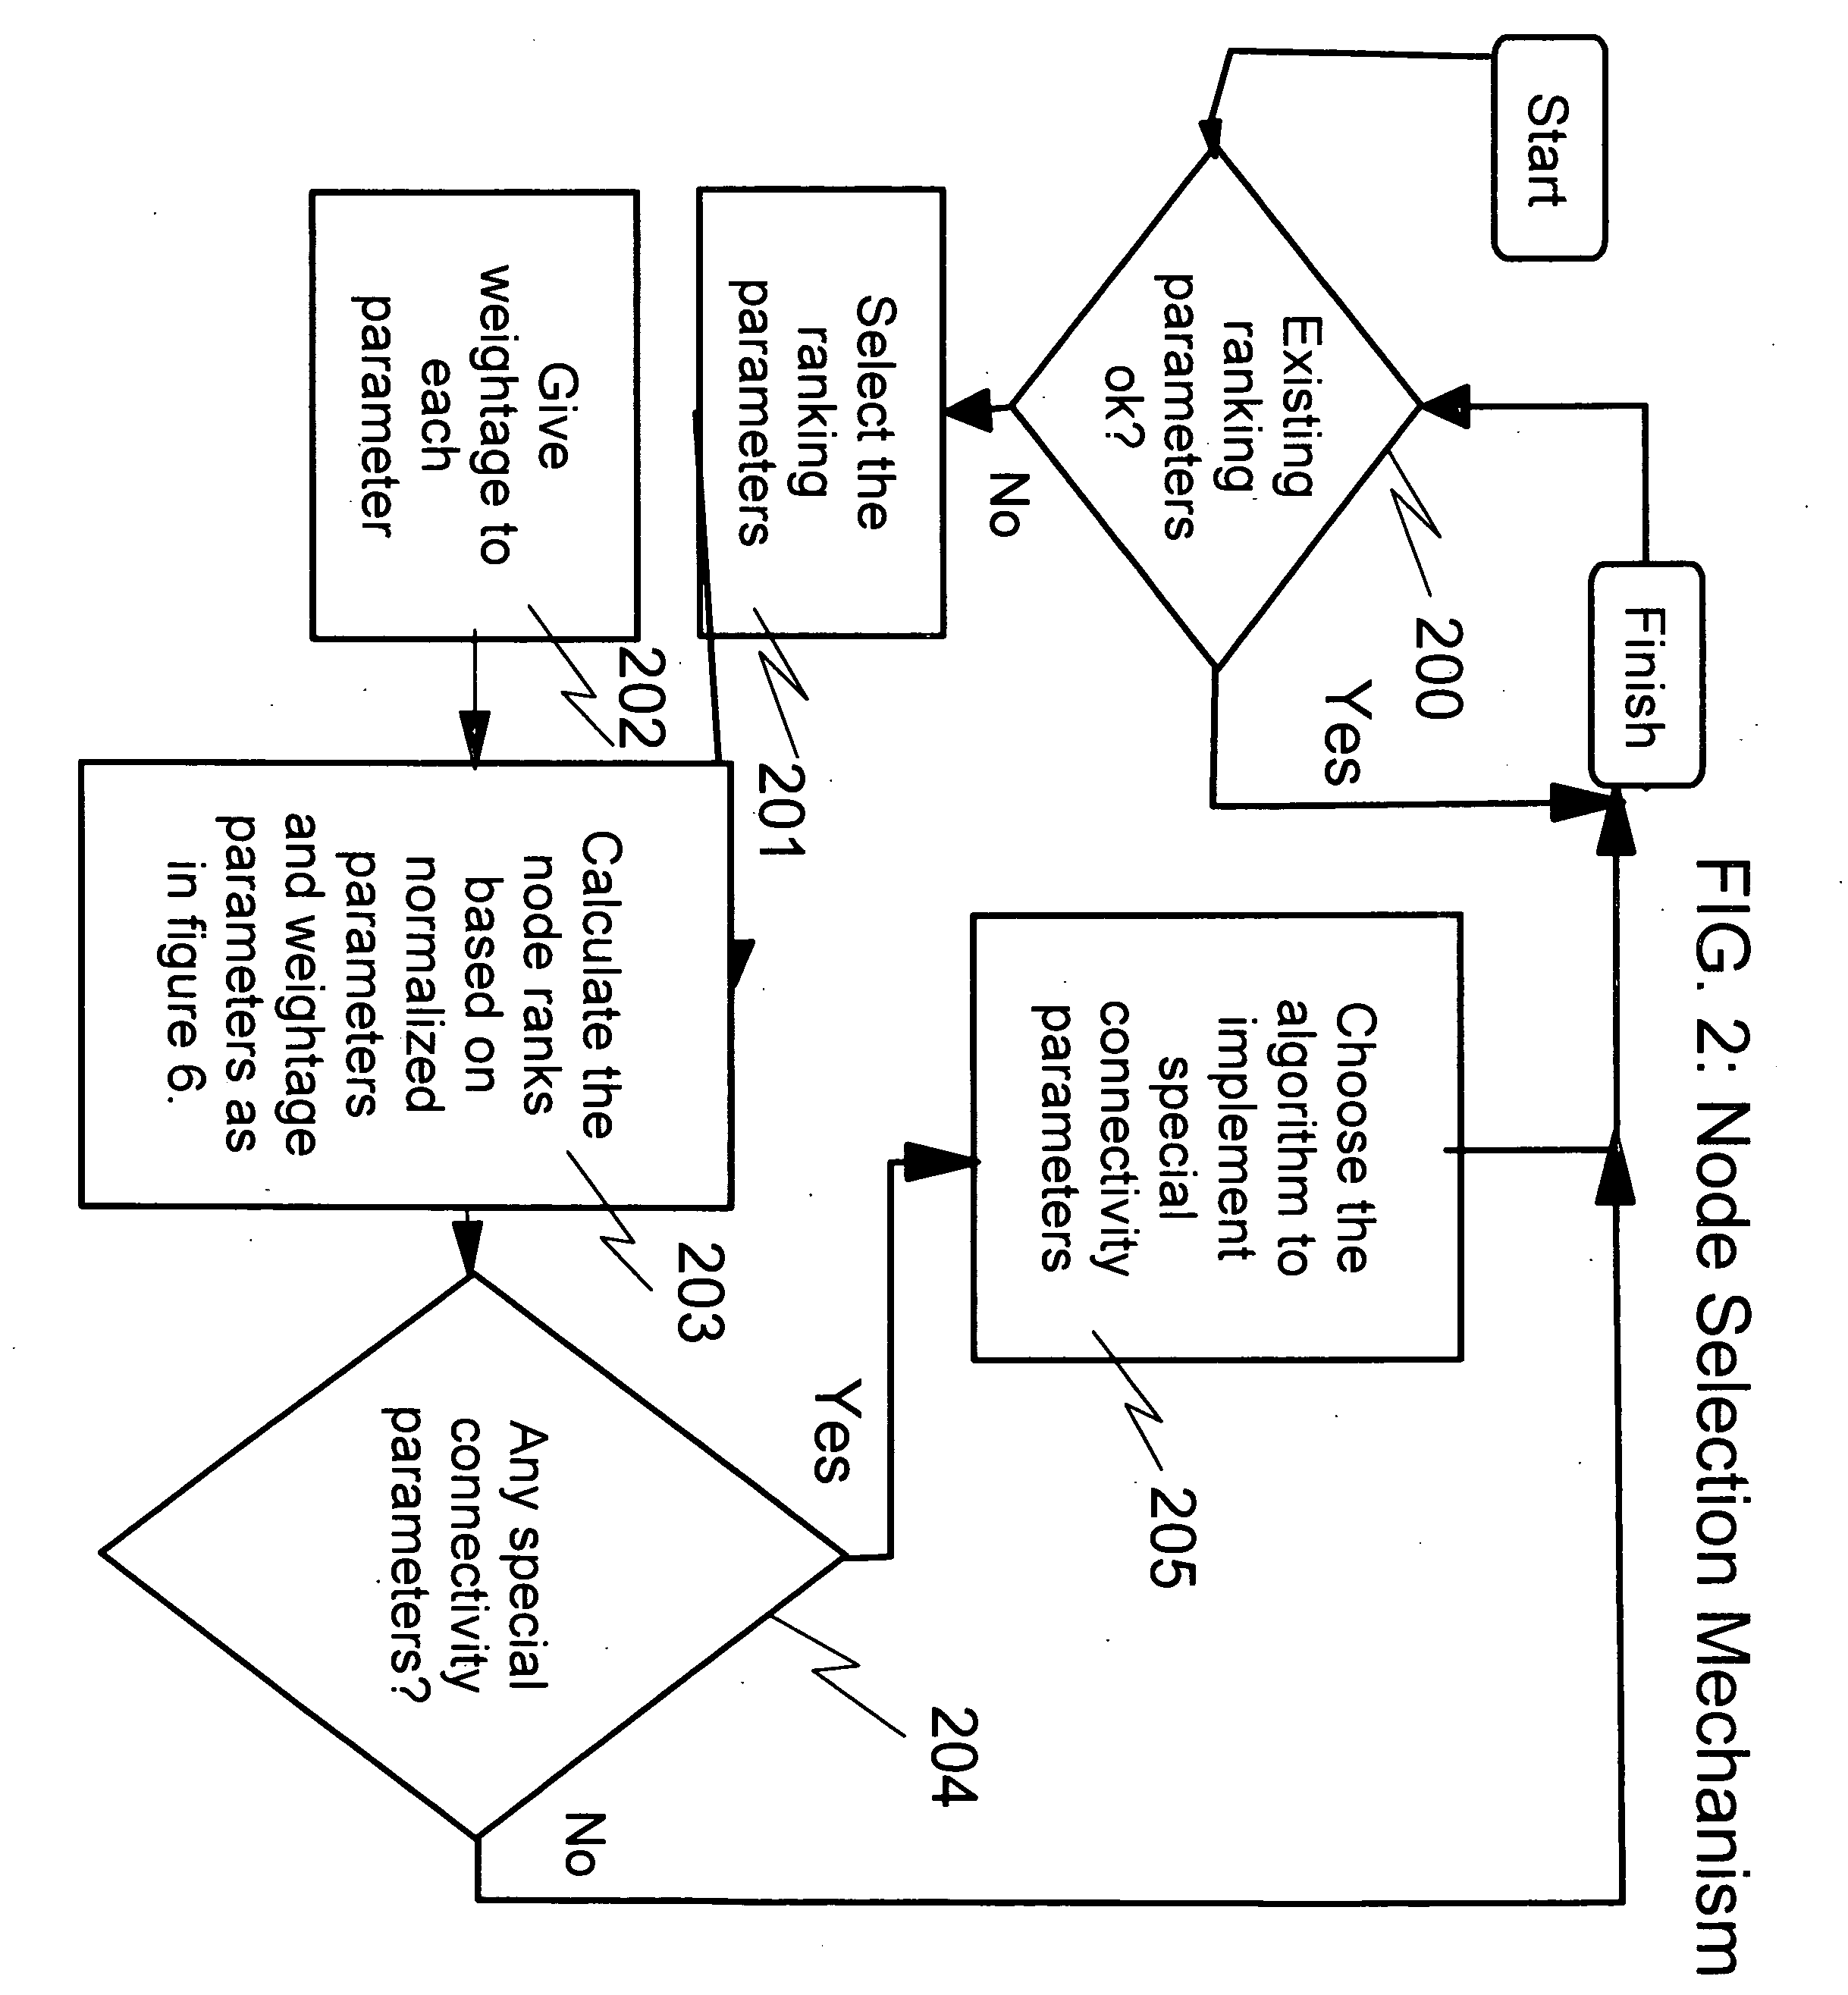 Method for using a priority queue to perform job scheduling on a cluster based on node rank and performance